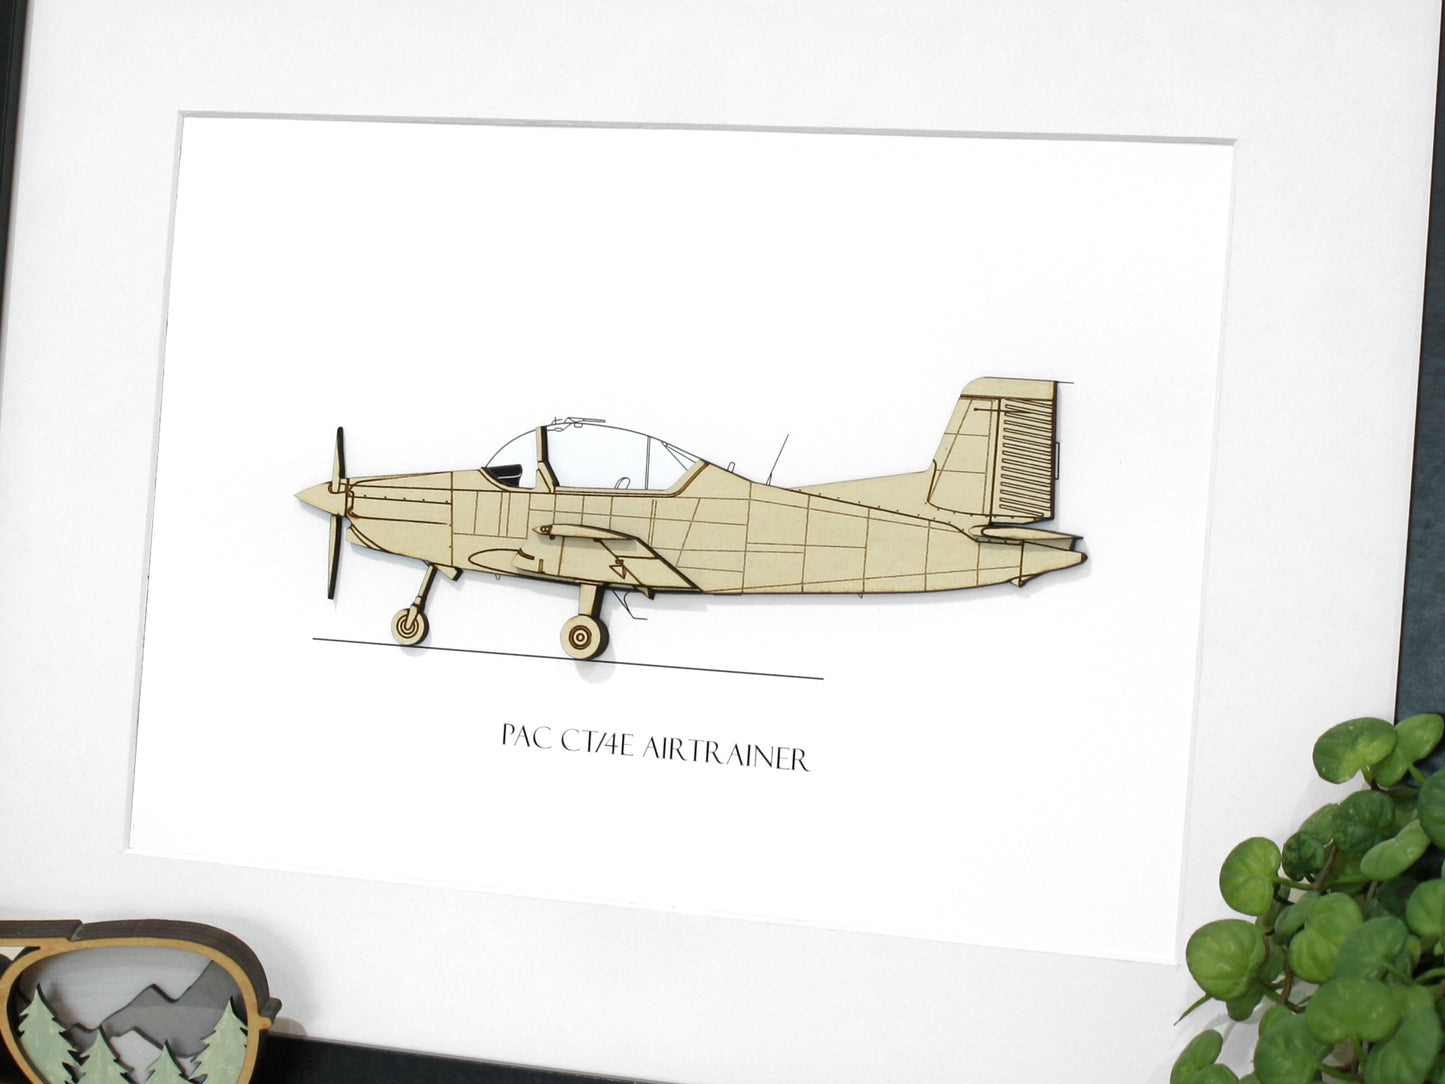 PAC CT/4E Airtrainer RNZF RAAF pilot gifts